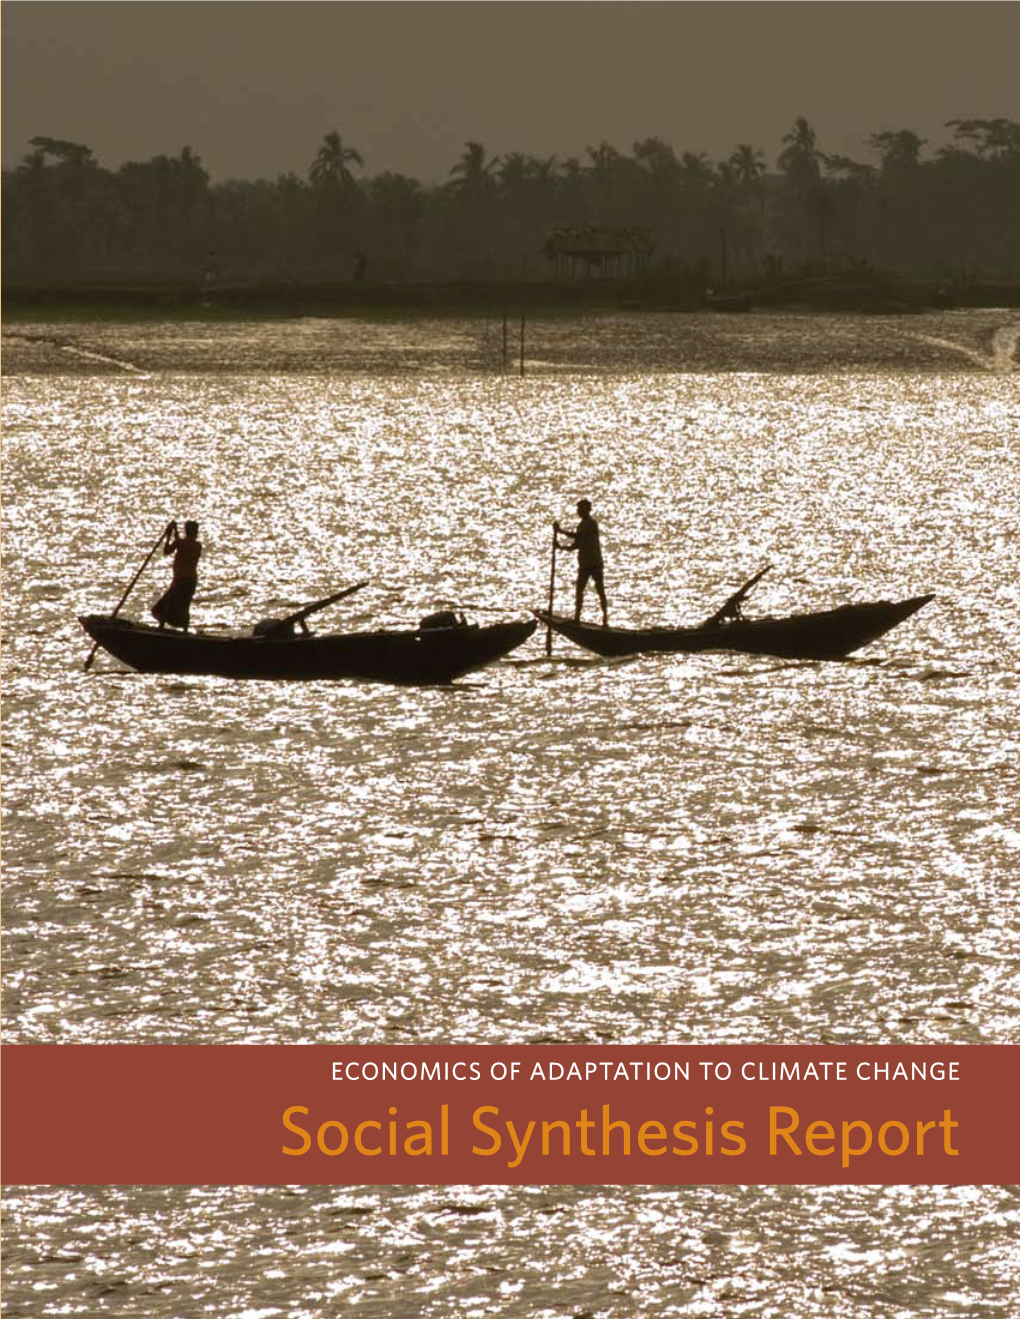 Social Synthesis Report